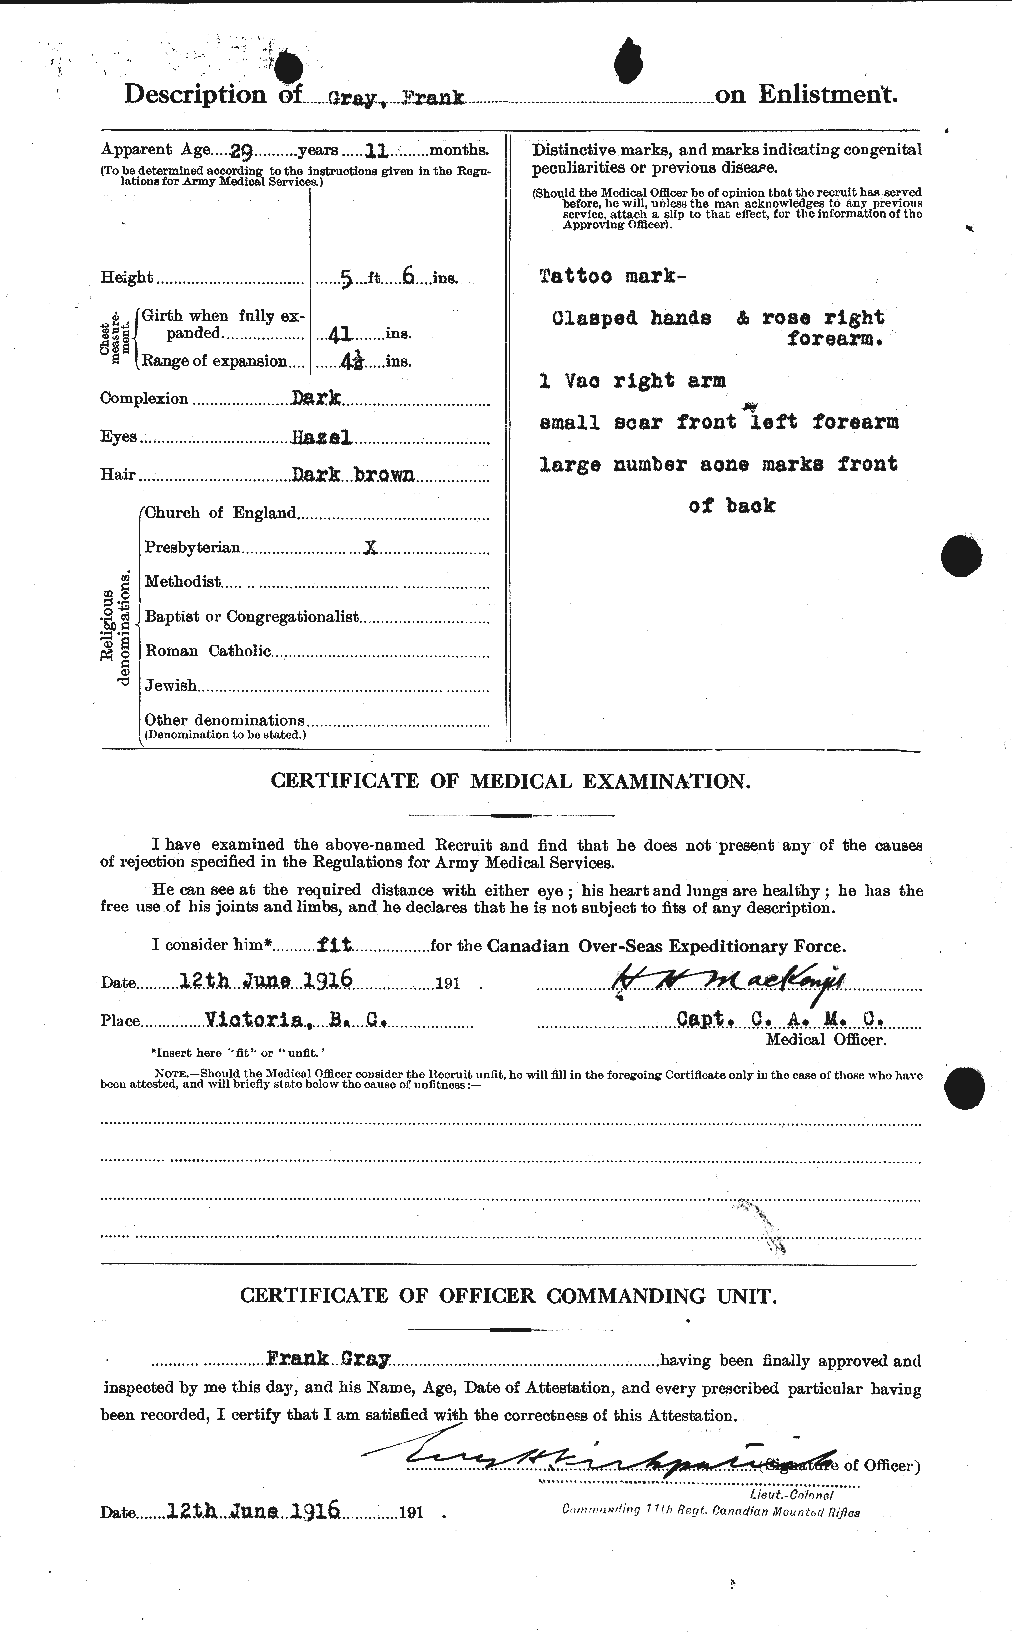 Personnel Records of the First World War - CEF 361541b